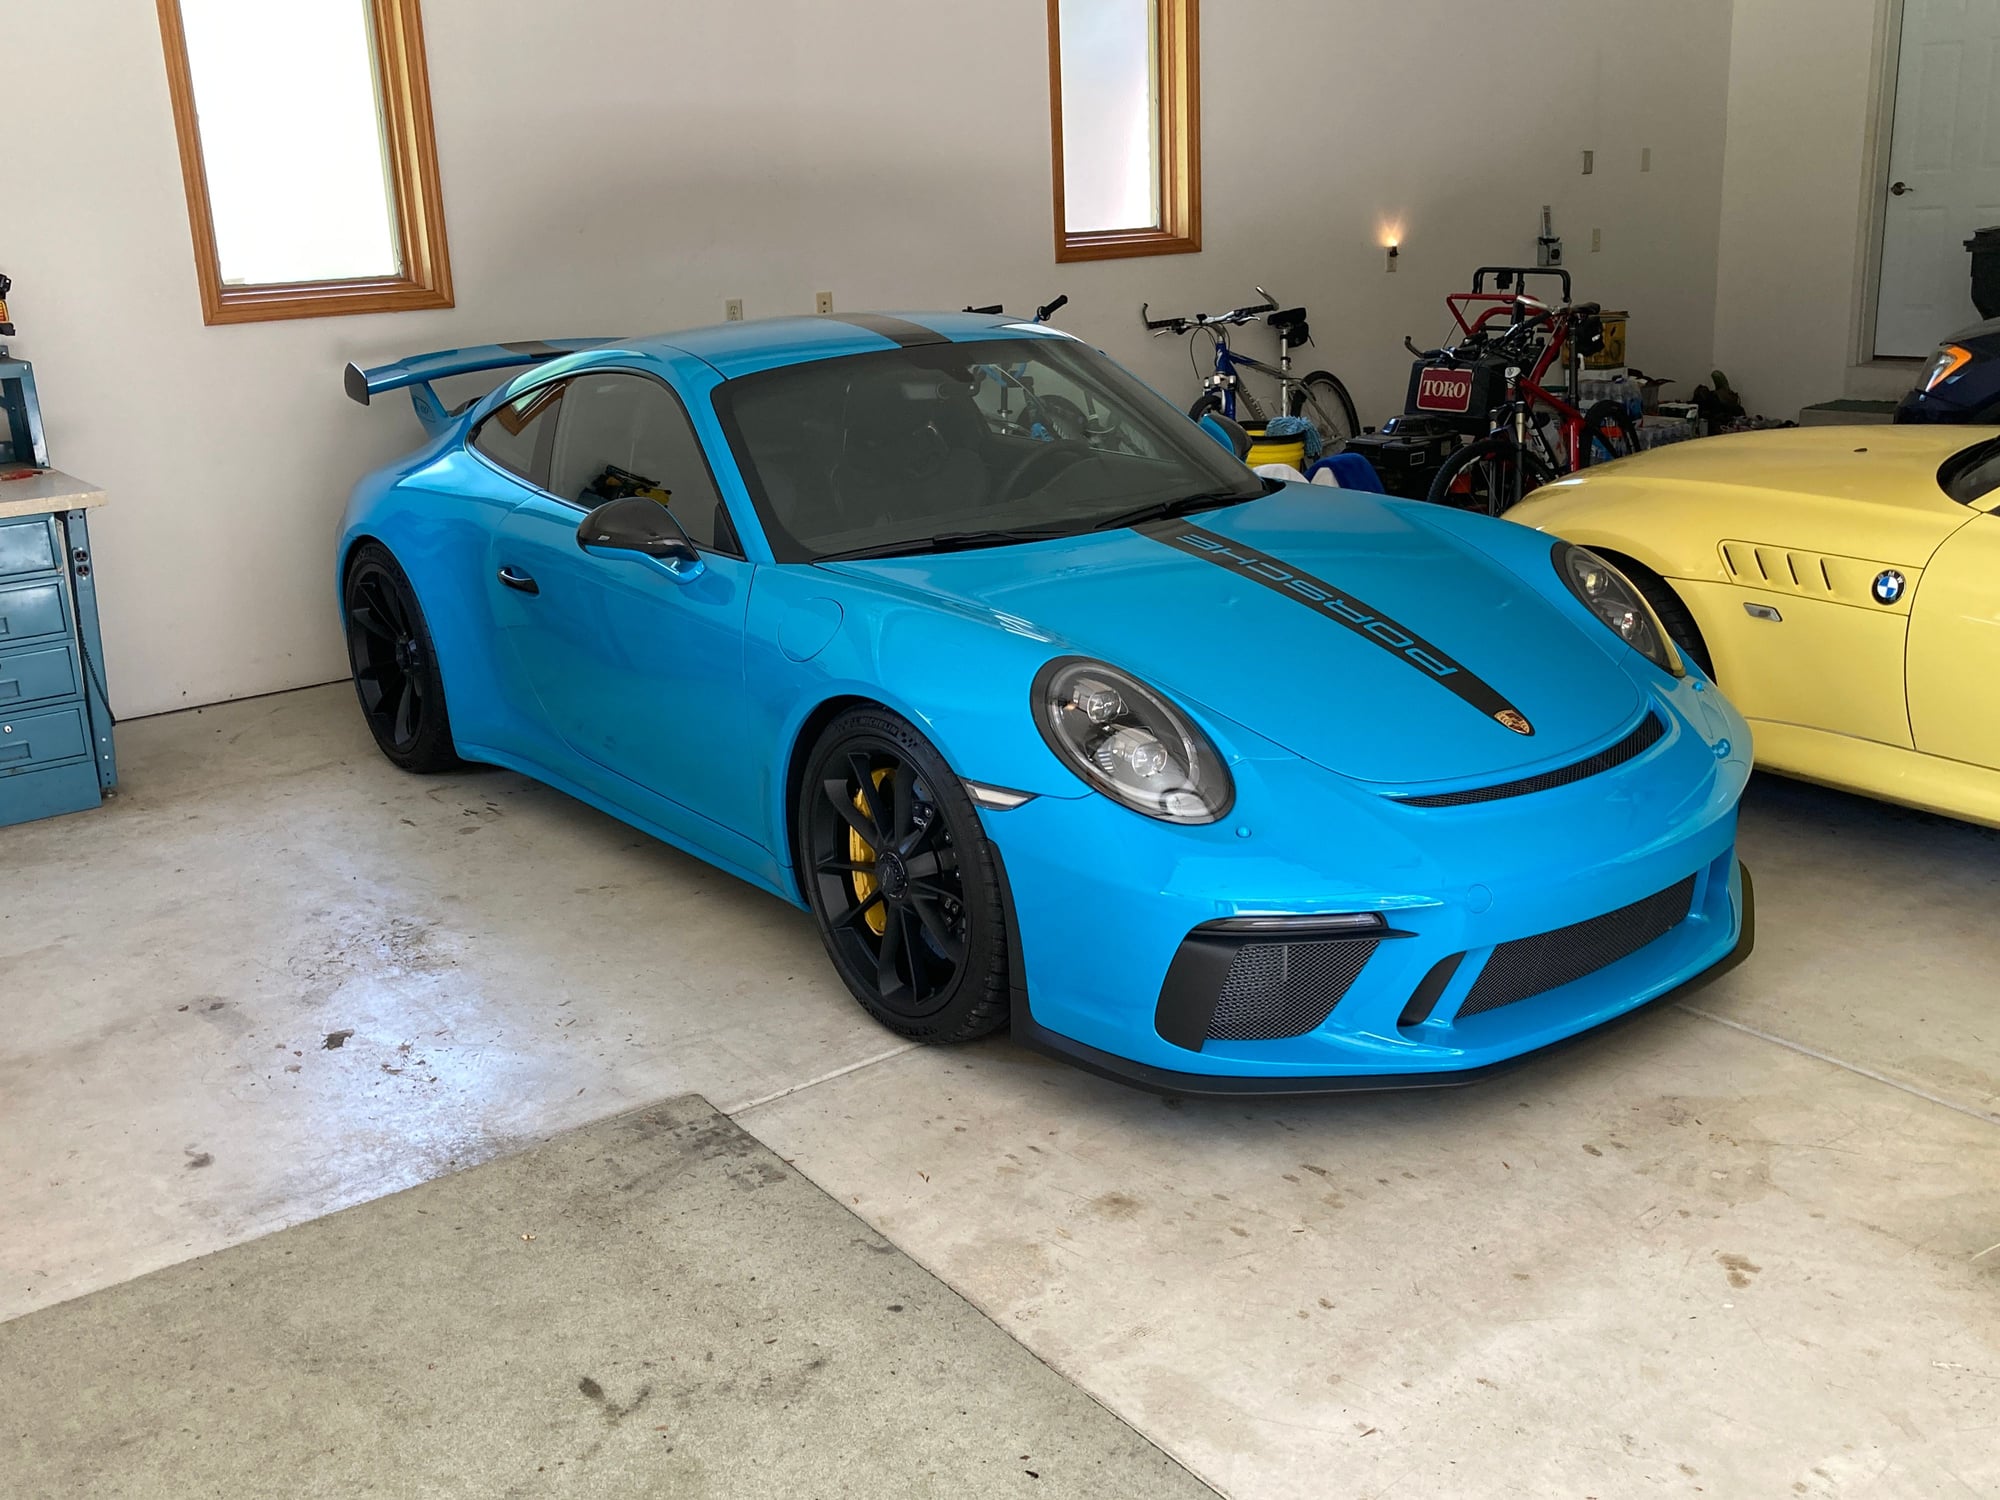 2018 Porsche 911 - 2018 GT3 - Used - VIN WP0AC2A92JS174825 - 2,200 Miles - 6 cyl - 2WD - Manual - Coupe - Blue - Hales Corners, WI 53130, United States